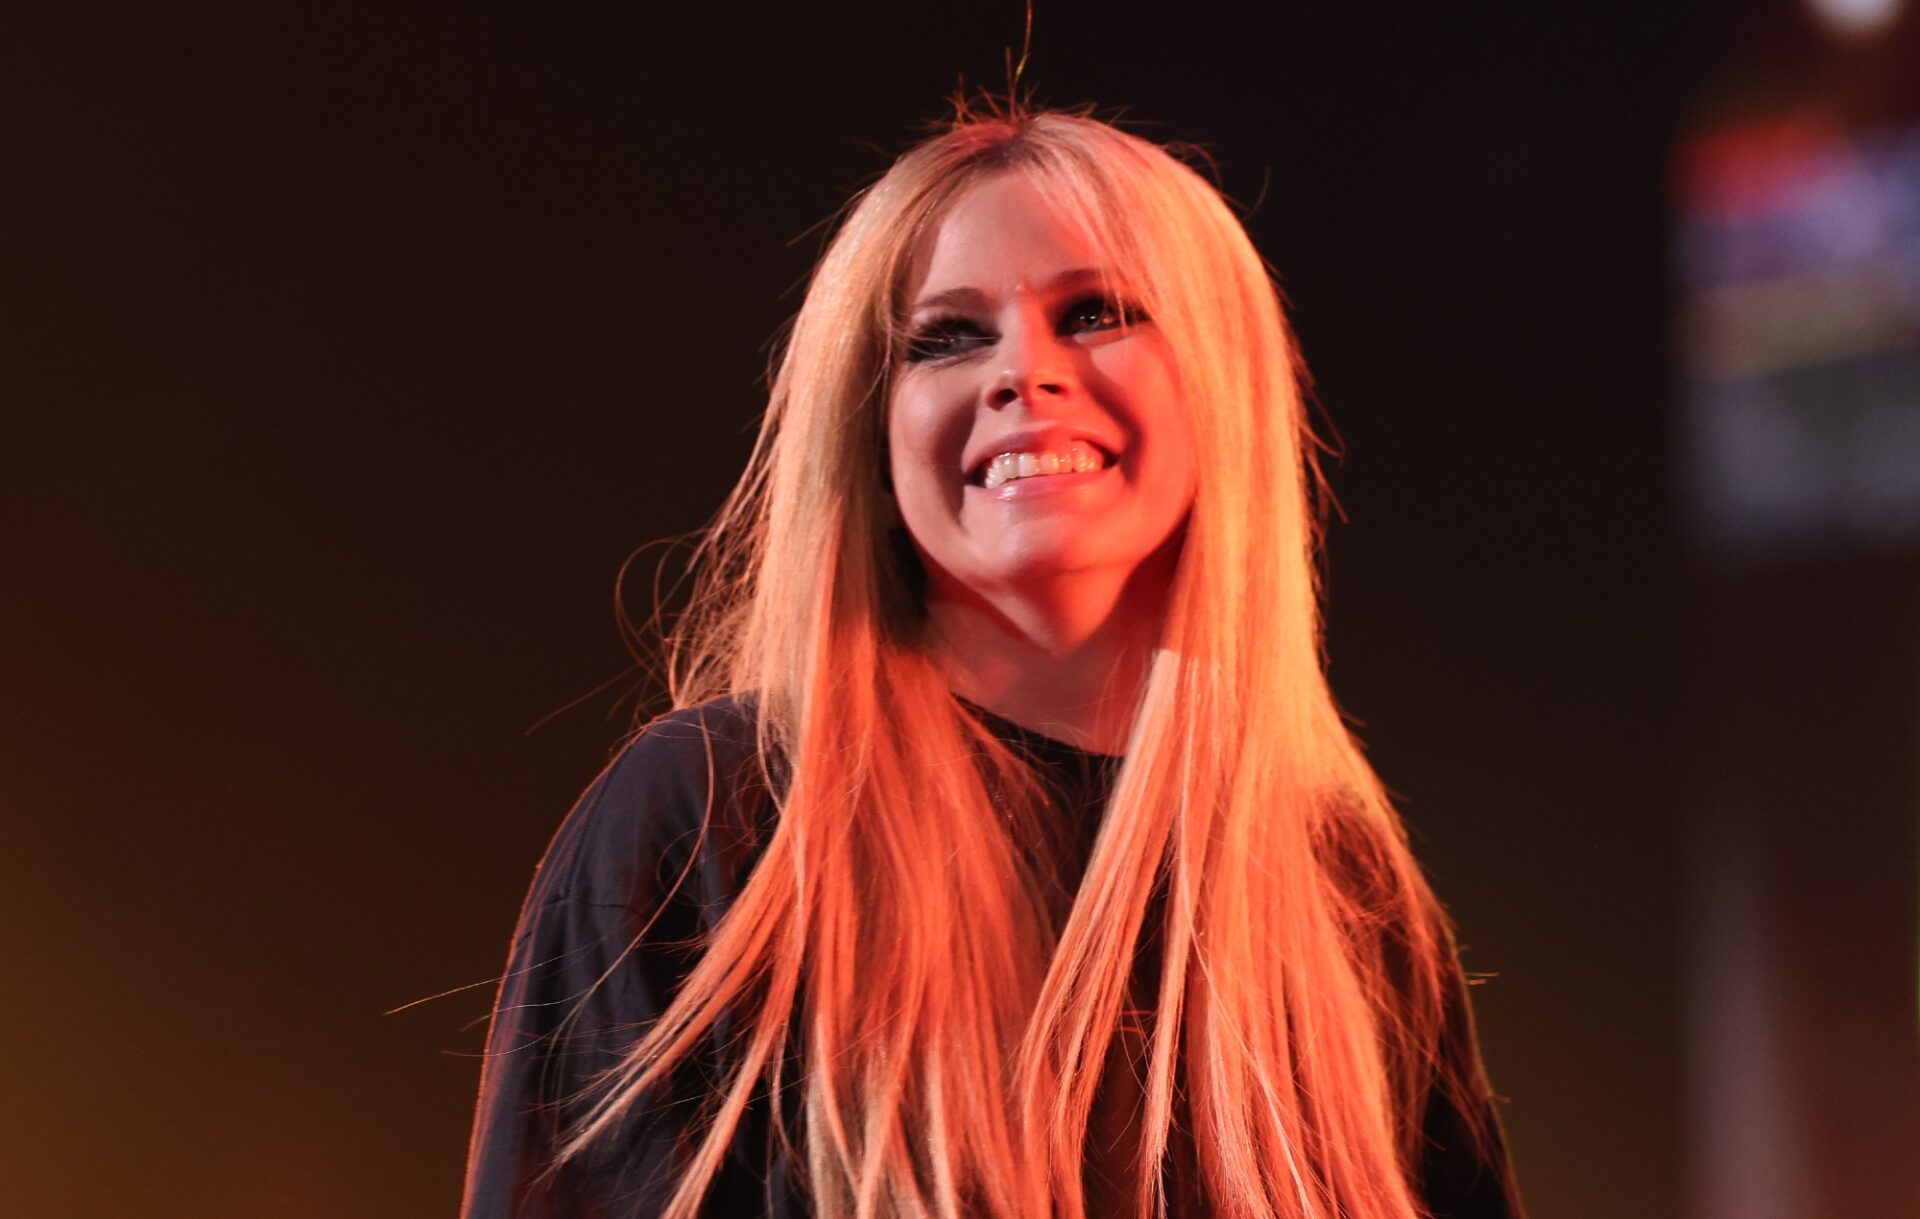 Avril Lavigne addresses body double conspiracy theory: "It's so dumb"